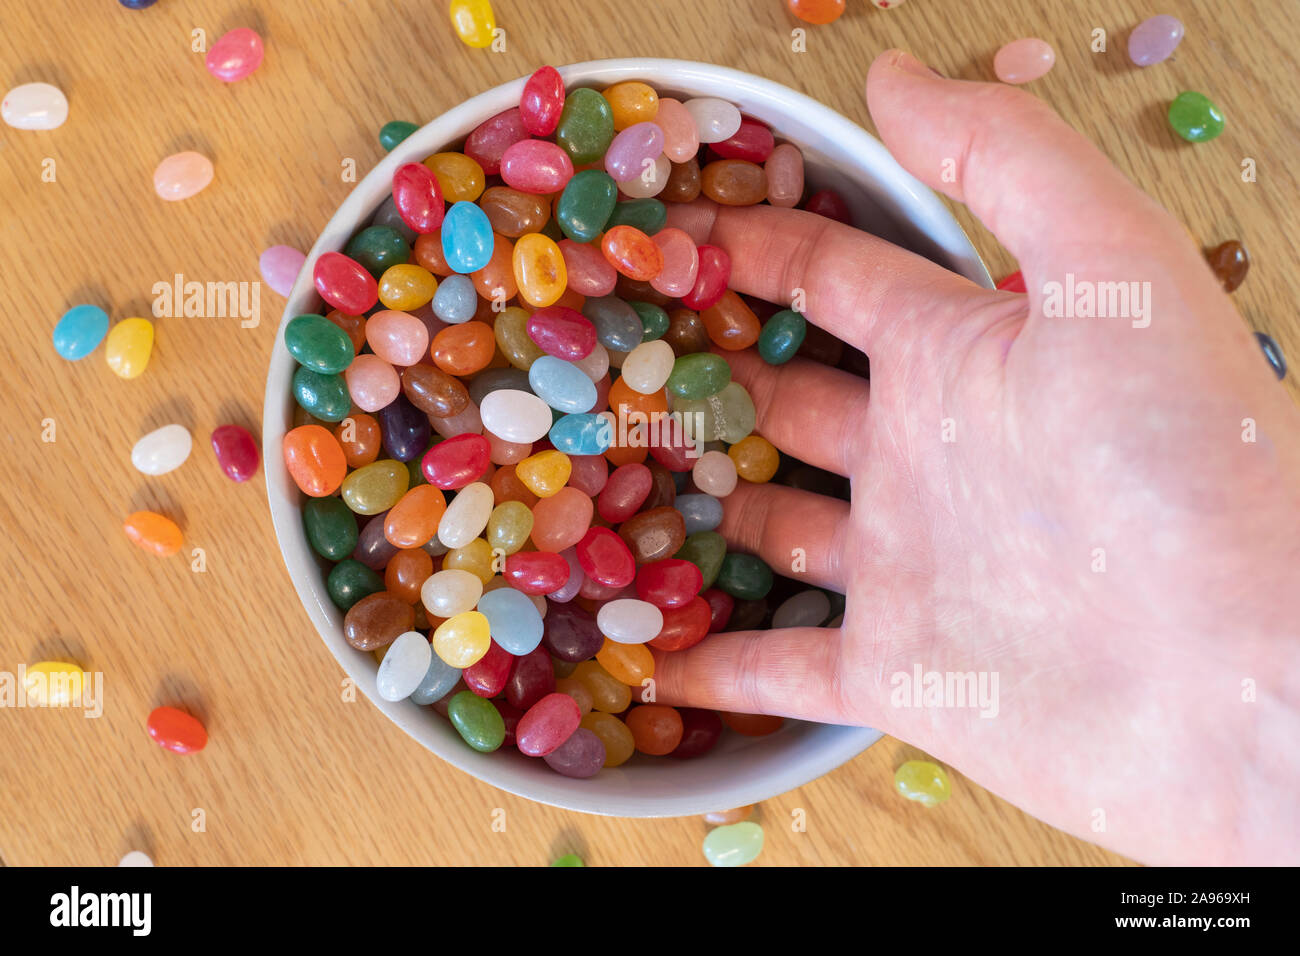 An adult man's hand scooping jelly beans in a bowl full of jellybeans. Concept, addiction to sweets, sweeties, candy, life's pleasures Stock Photo